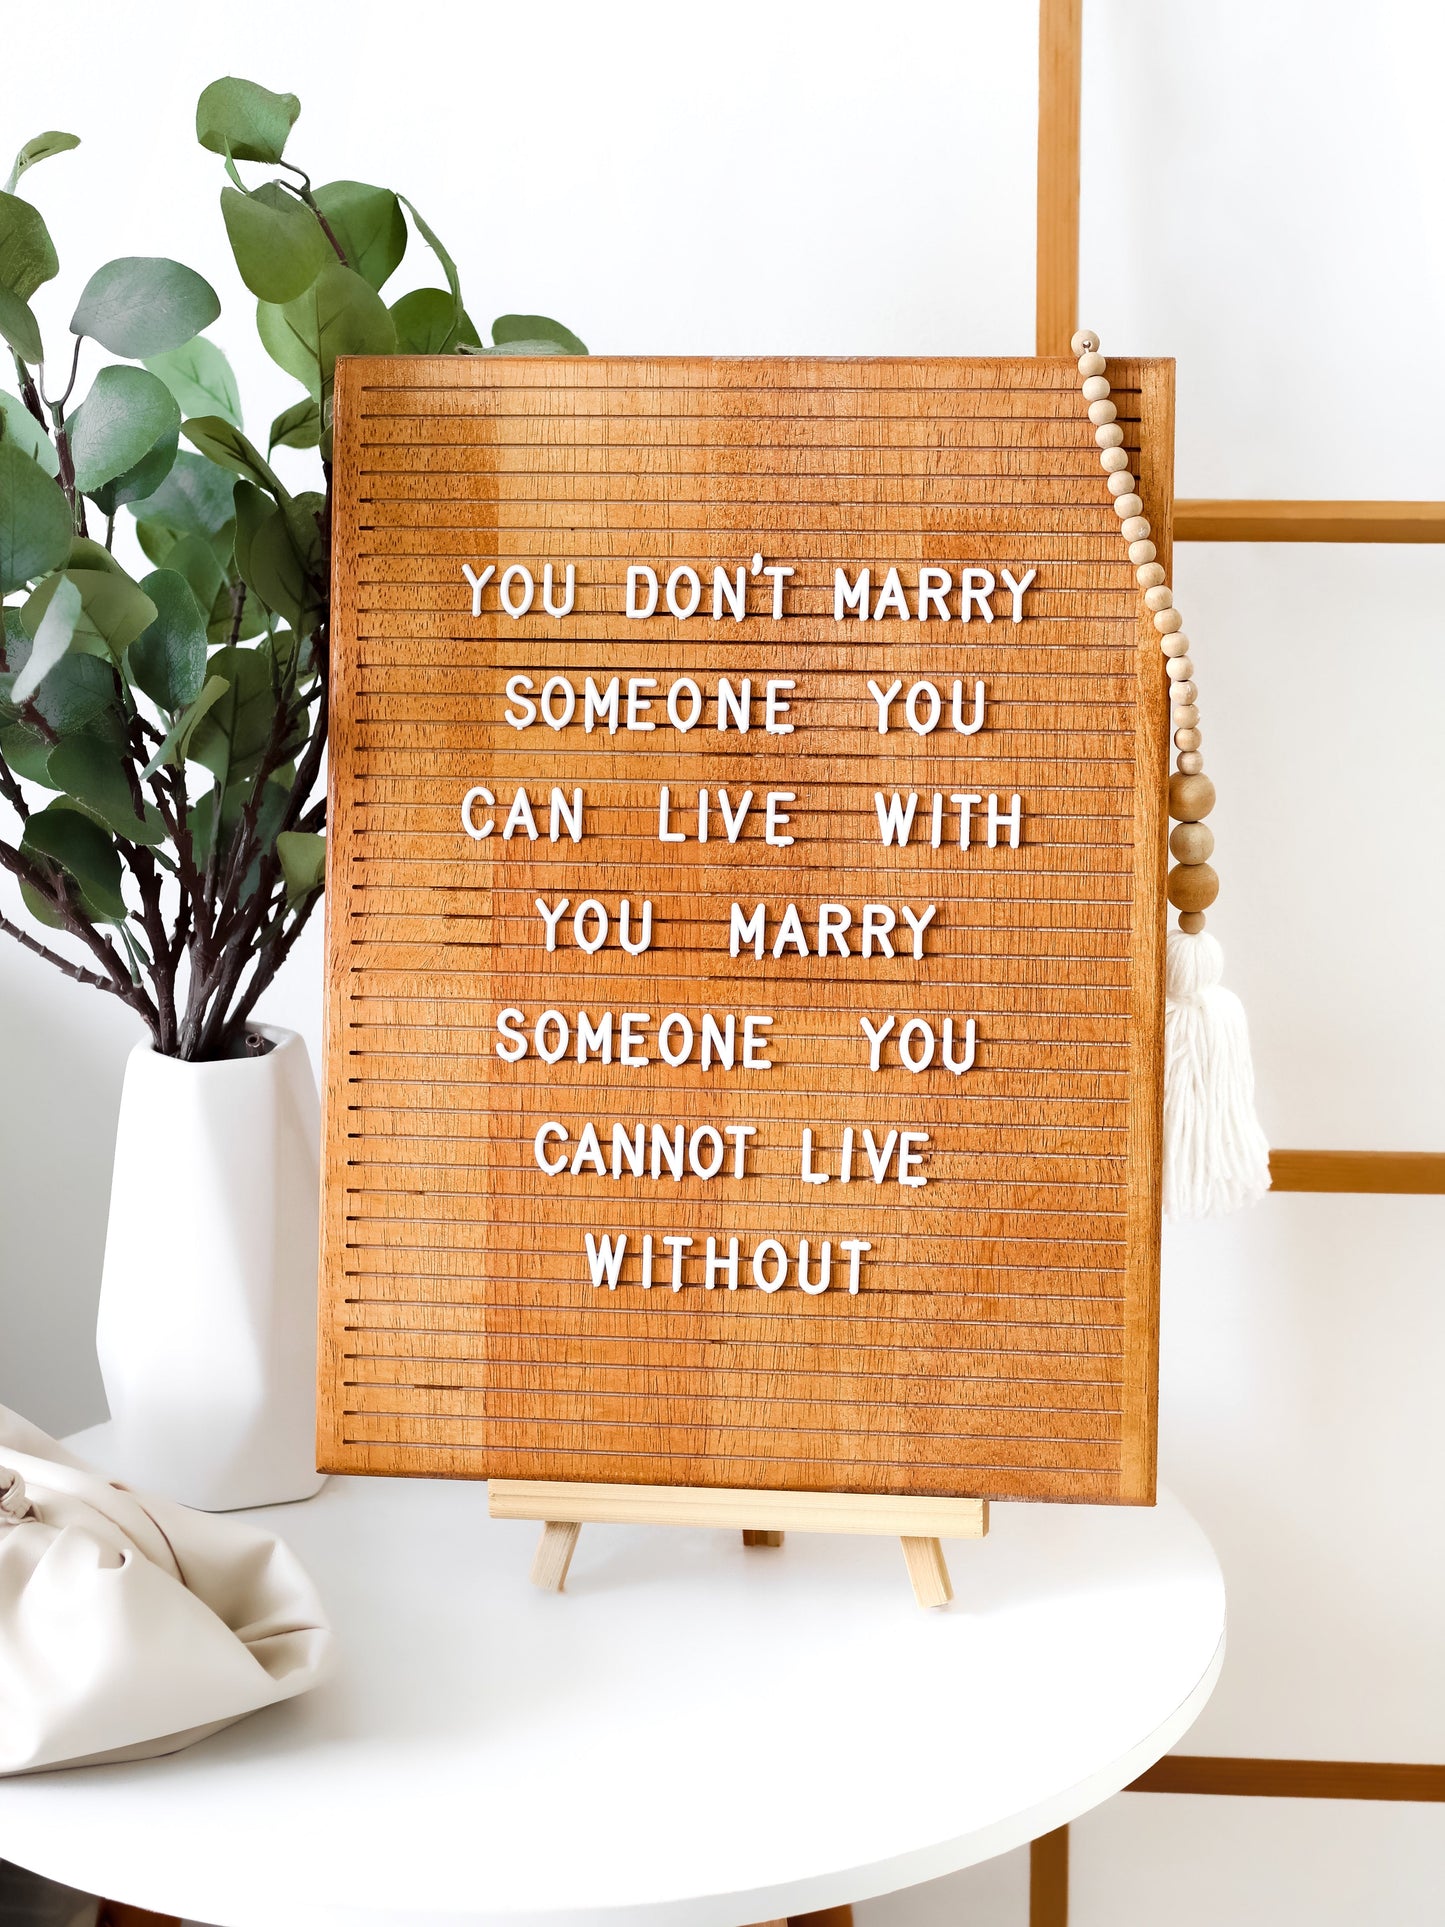 [SPECIAL OFFER] Wooden Letterboard - BUY 2